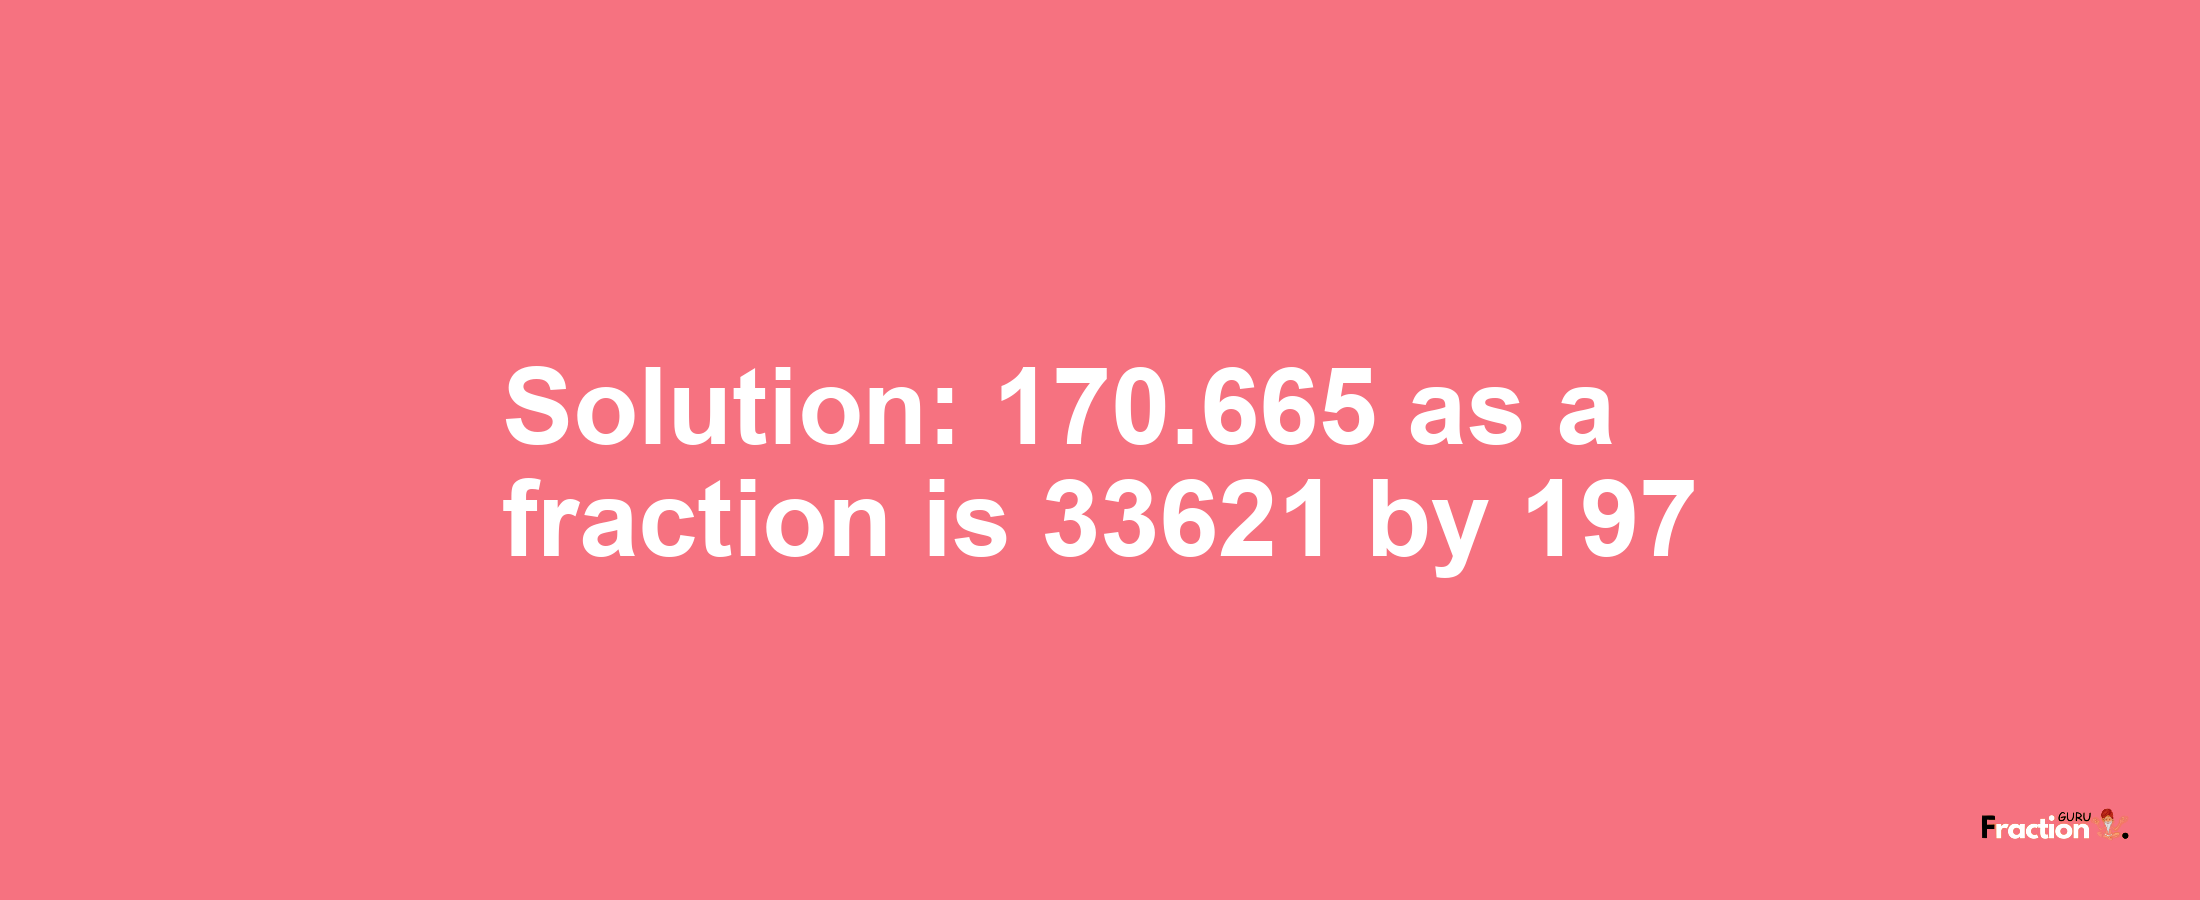 Solution:170.665 as a fraction is 33621/197